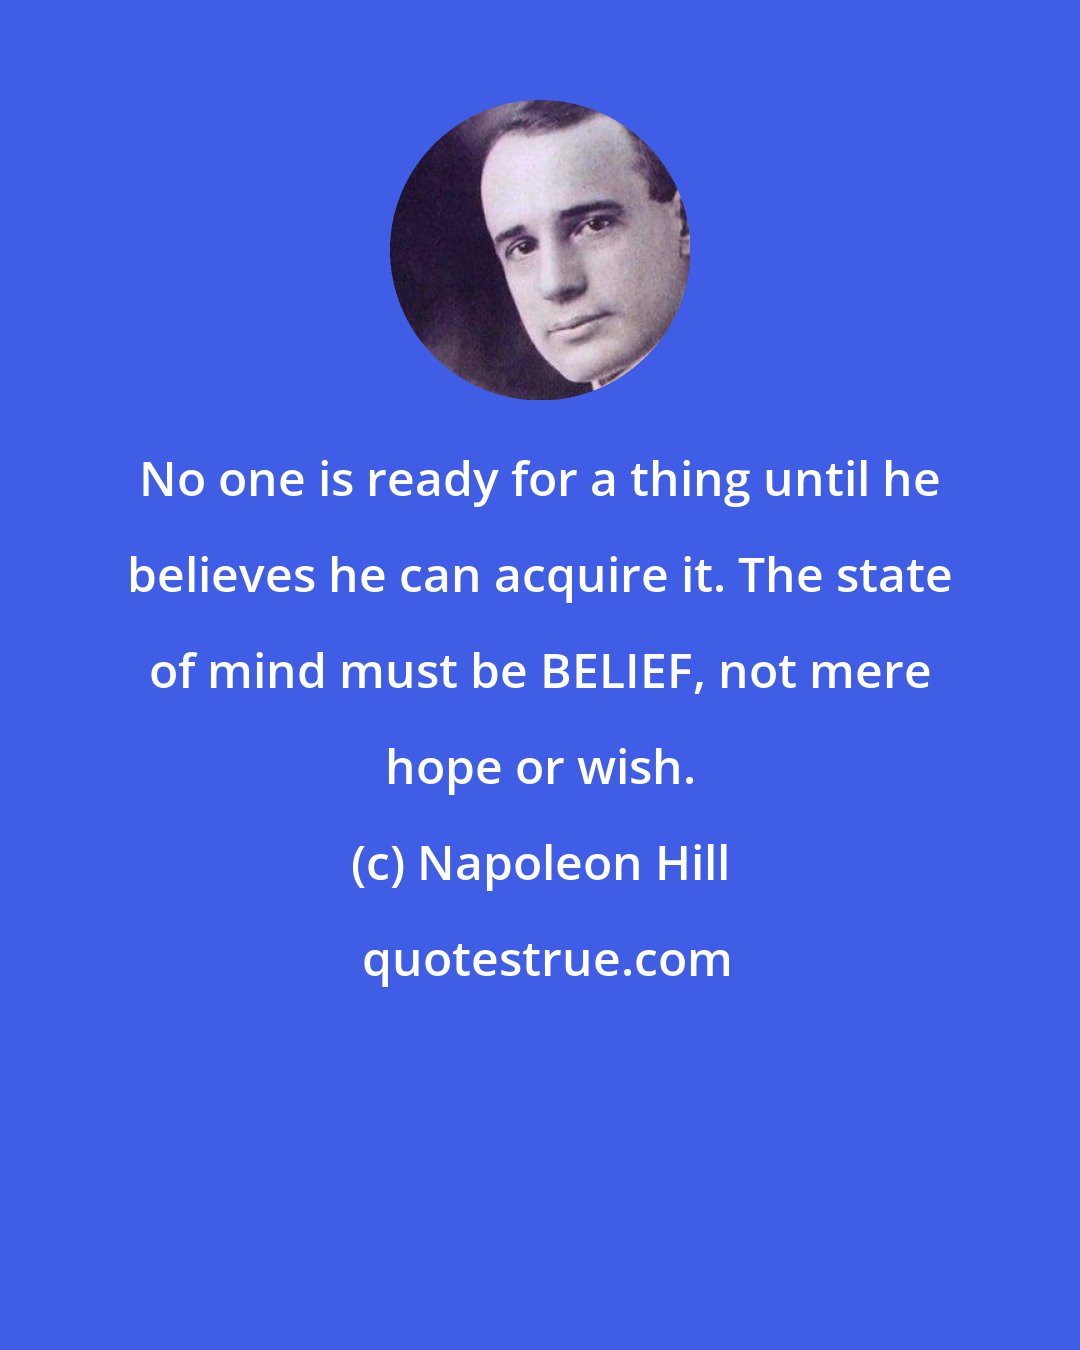 Napoleon Hill: No one is ready for a thing until he believes he can acquire it. The state of mind must be BELIEF, not mere hope or wish.